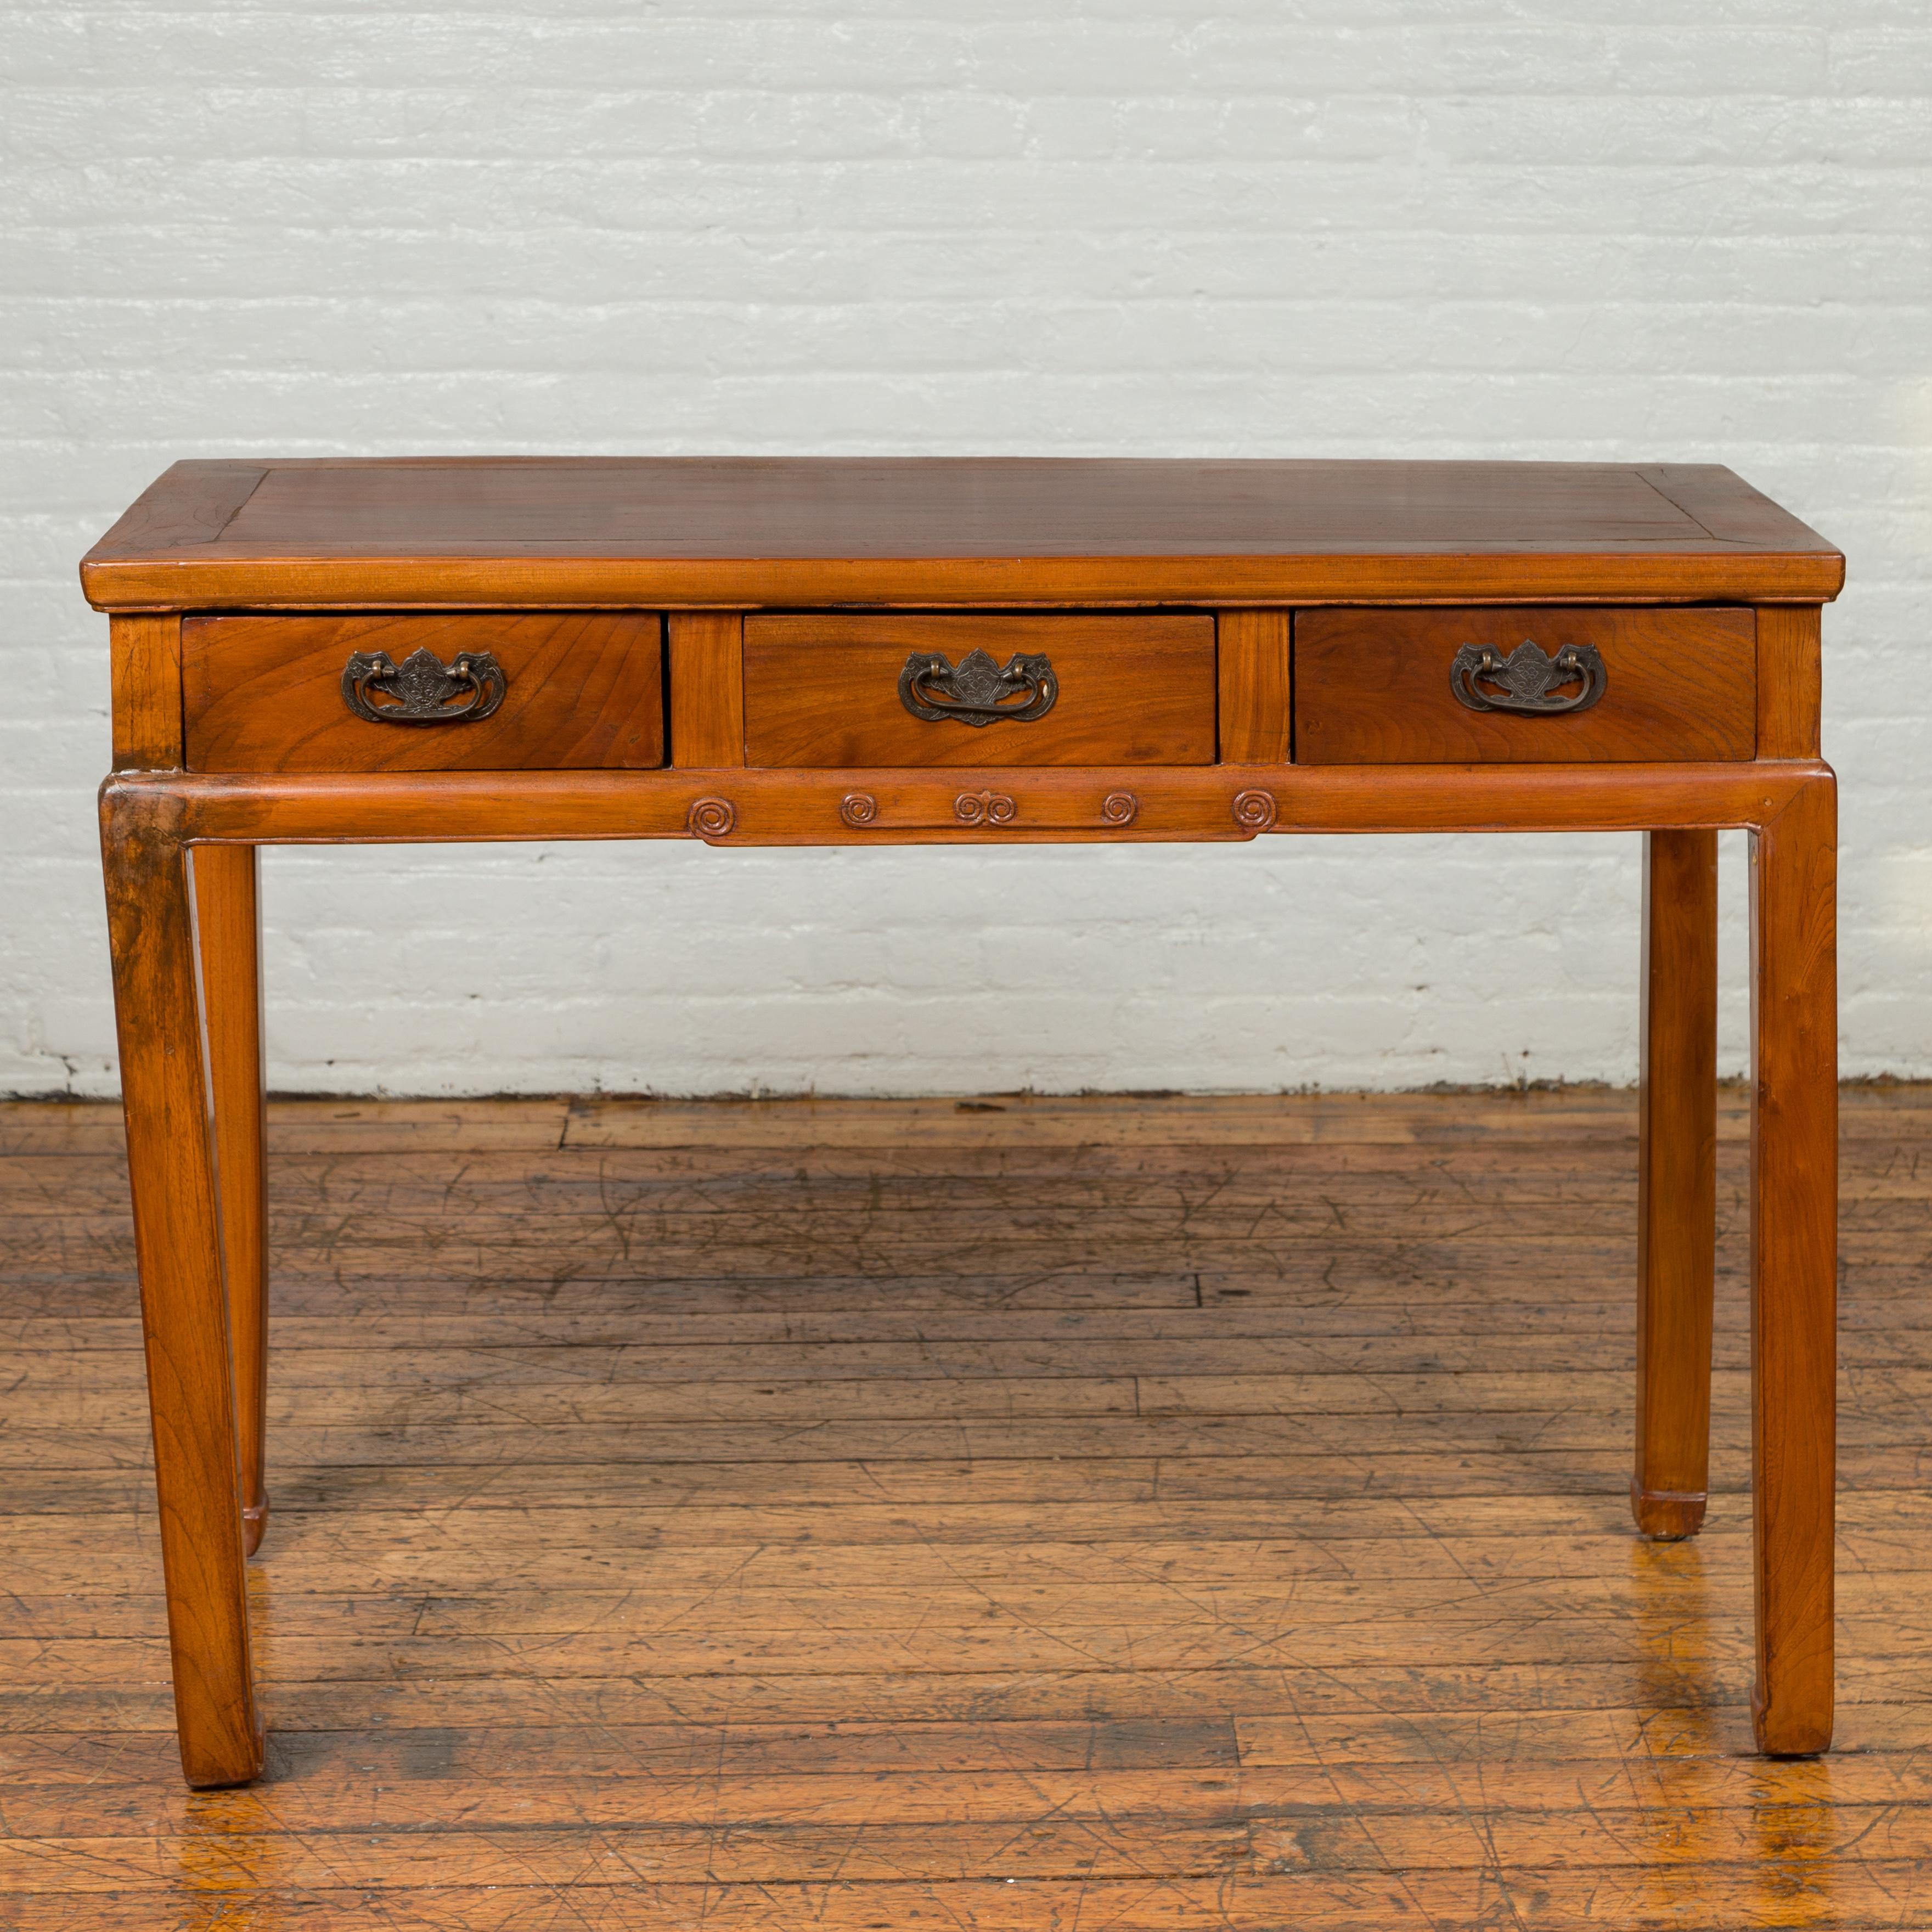 A vintage Chinese elmwood desk from the mid-20th century, with three drawers and petite swirling scrolls. Born in China during the midcentury period, this elm writing table features a rectangular top sitting above three drawers, each fitted with